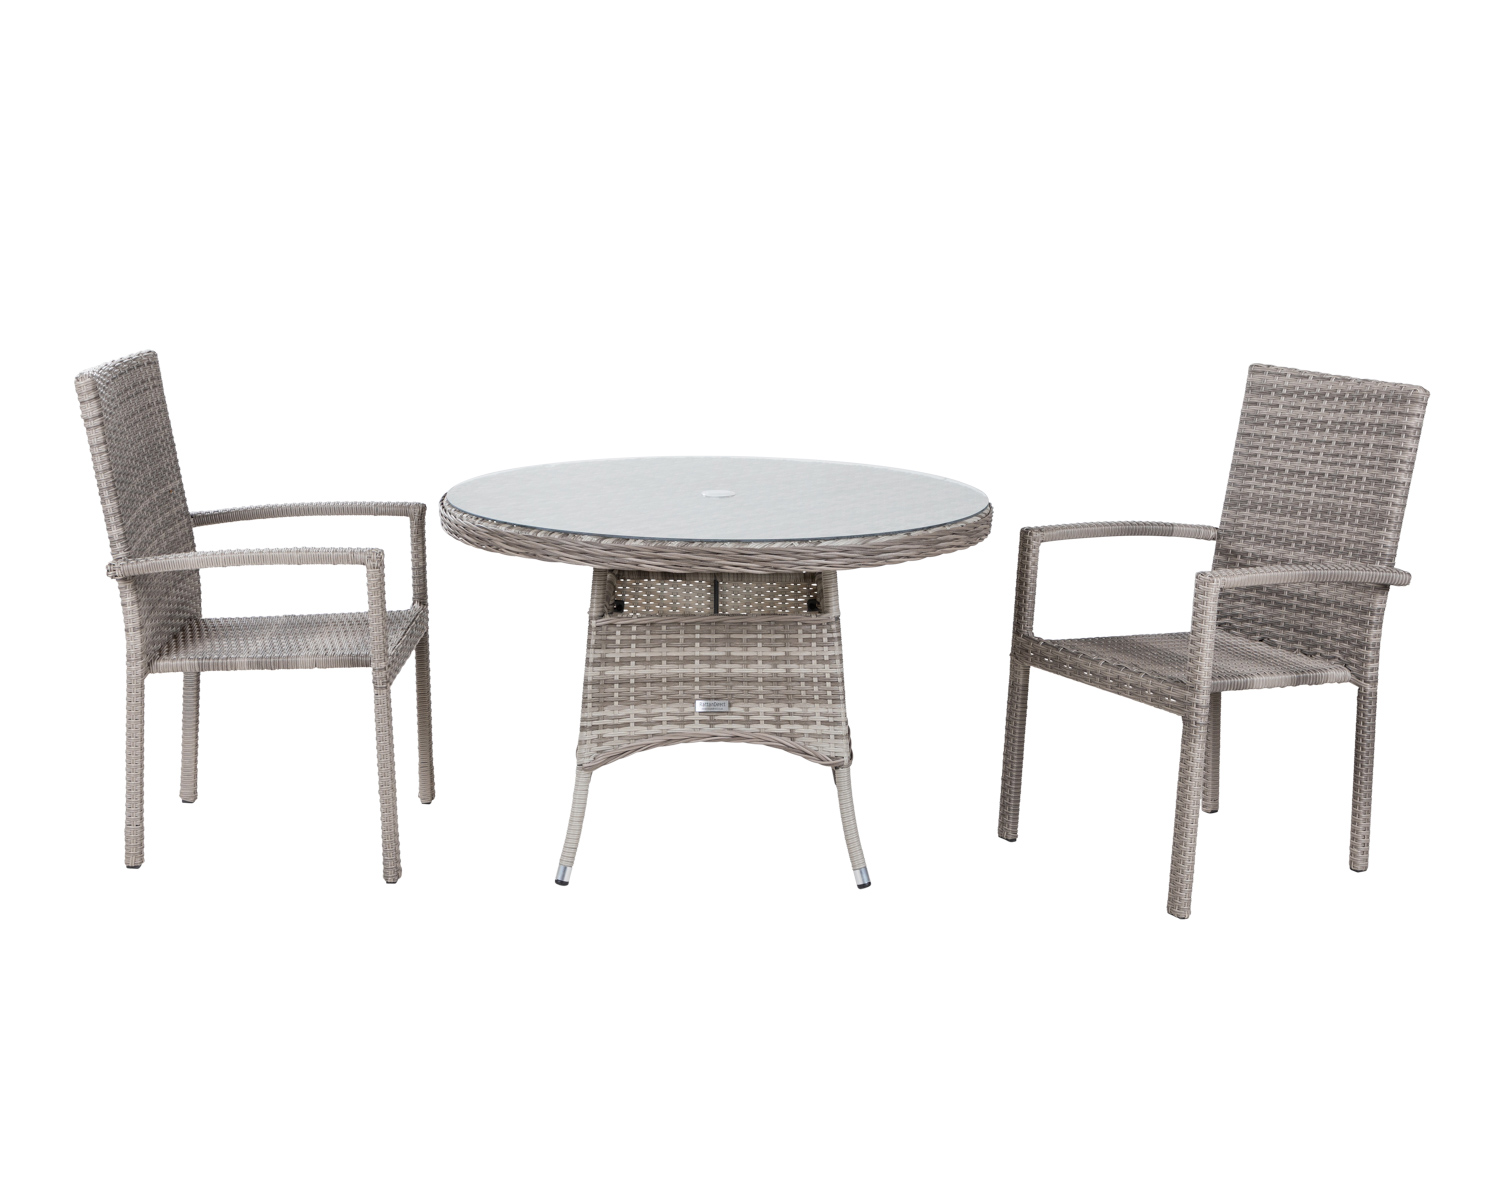 Small Round Rattan Garden Dining Table Amp 2 Stackable Chairs In Grey Rio Rattan Direct